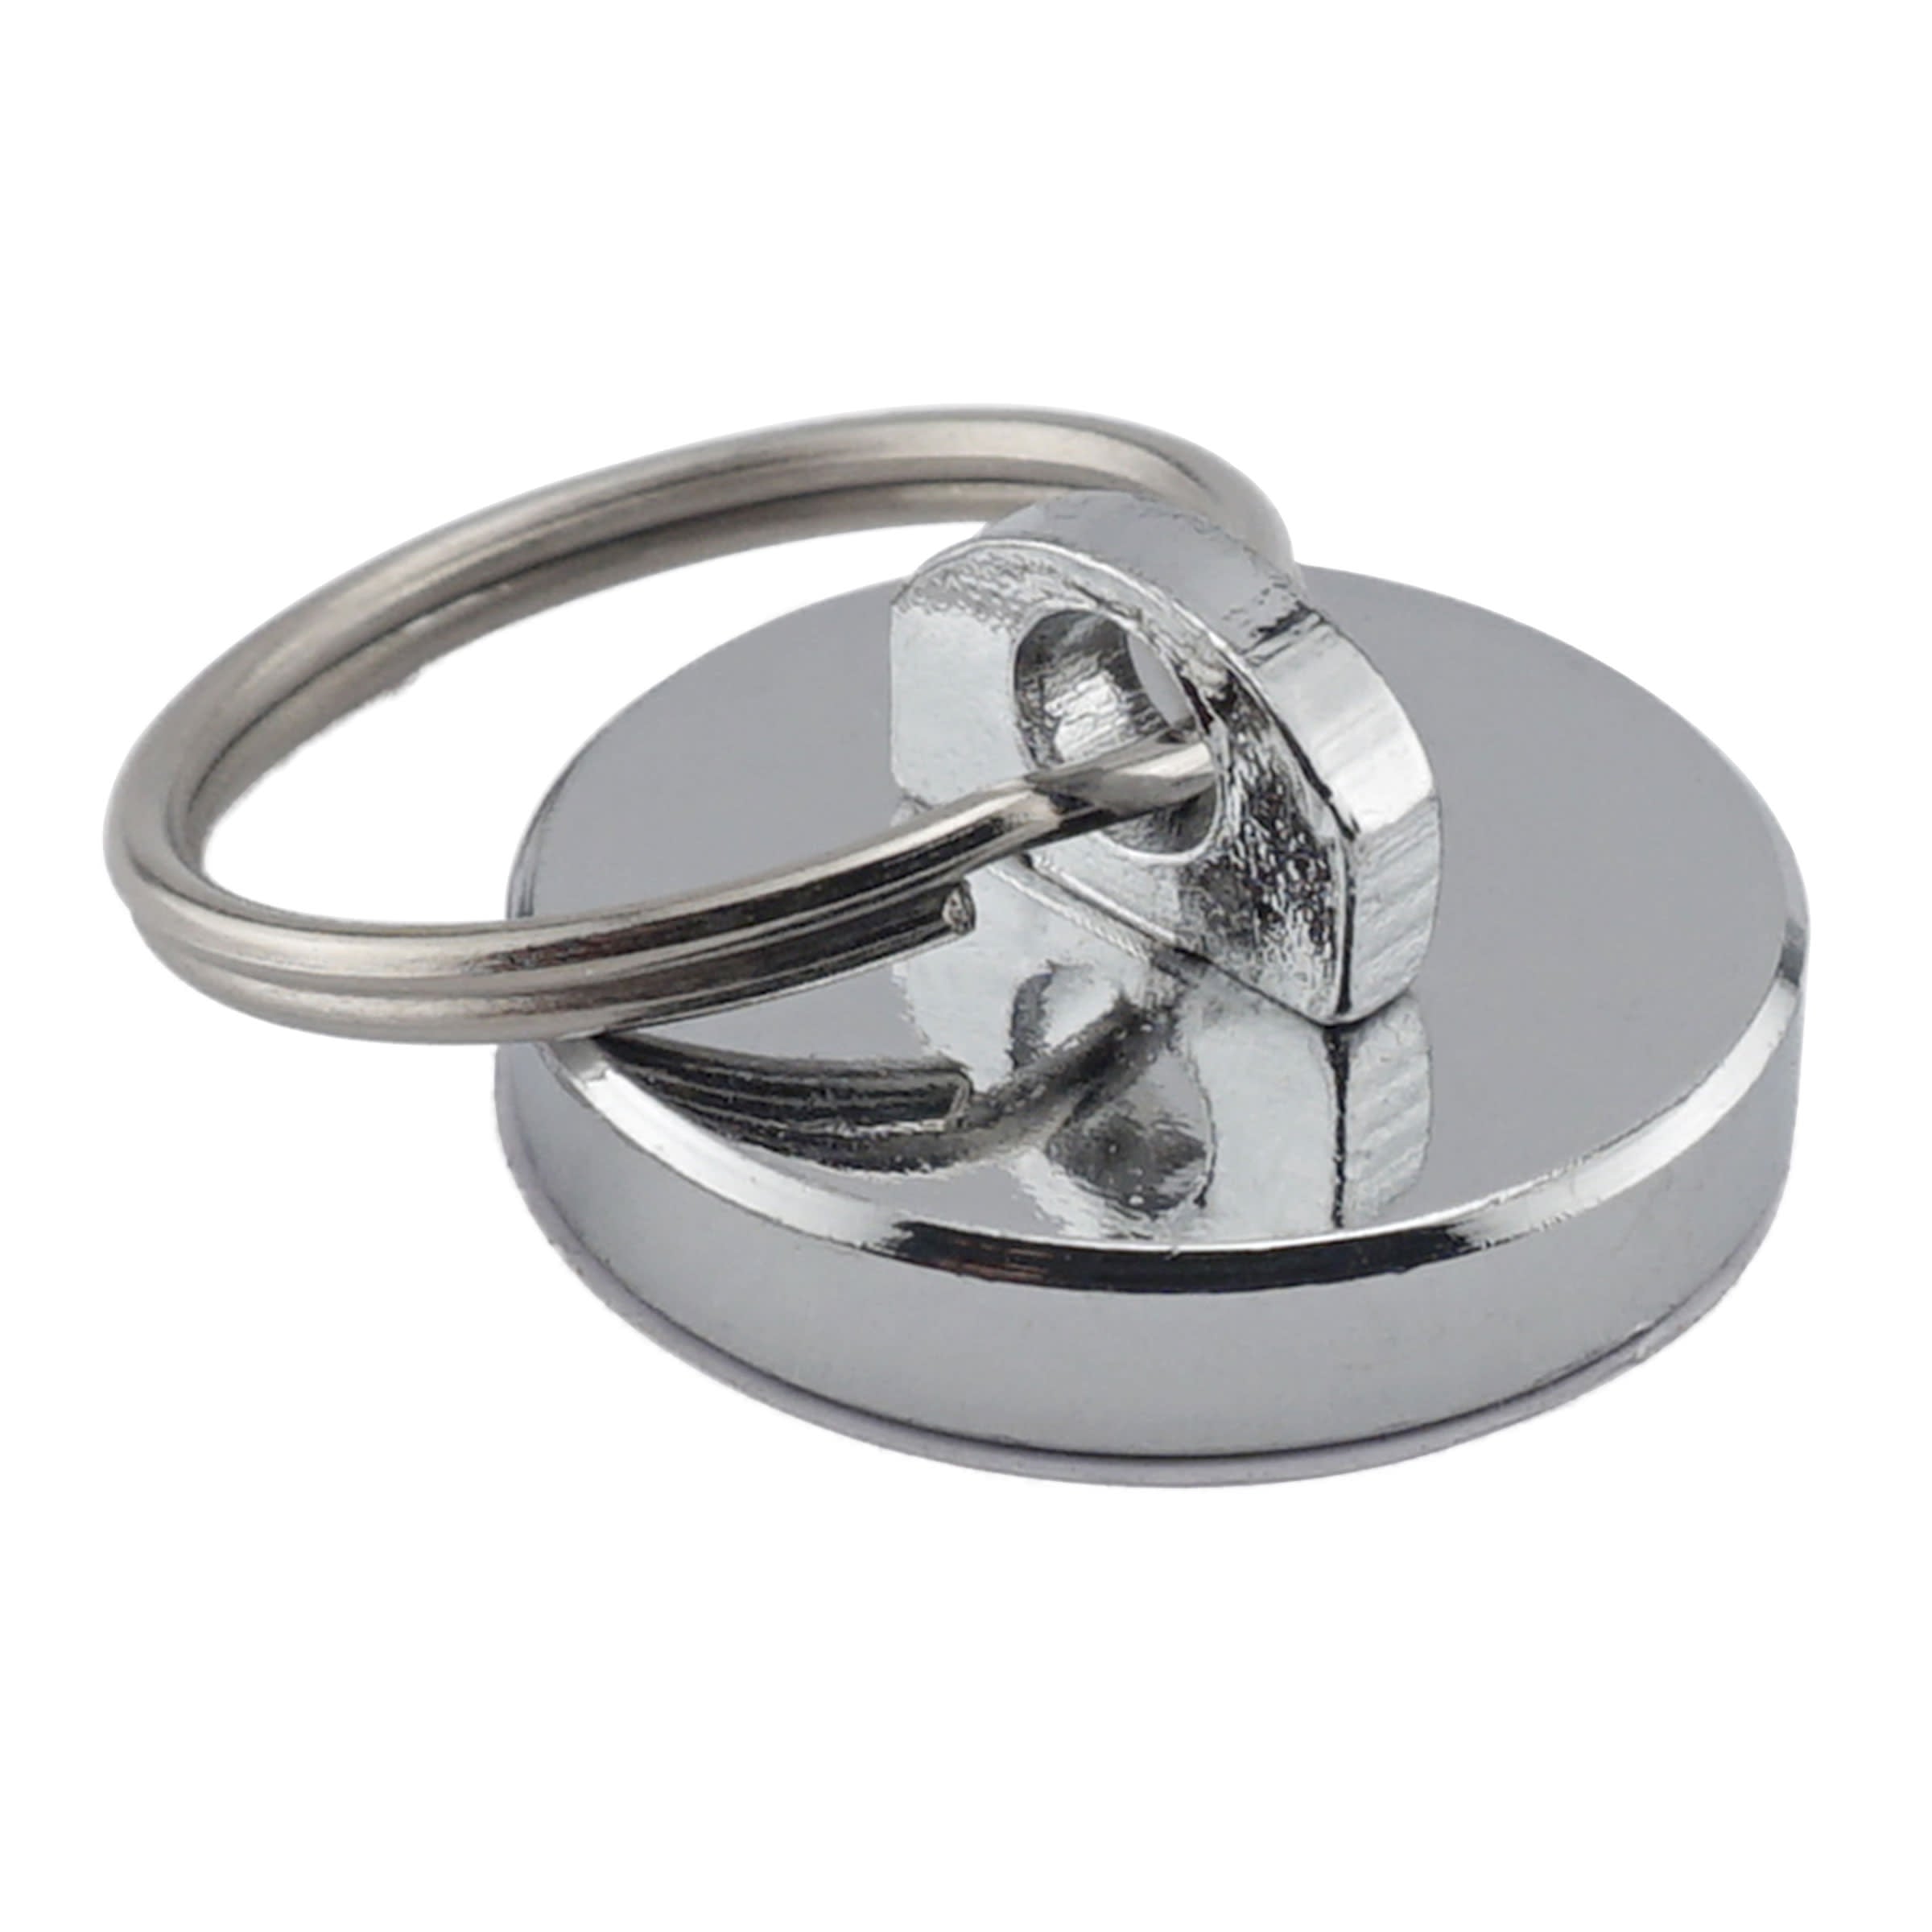 POWERFUL MAGNETIC KEYCHAIN Super Strong Magnet Split Rings